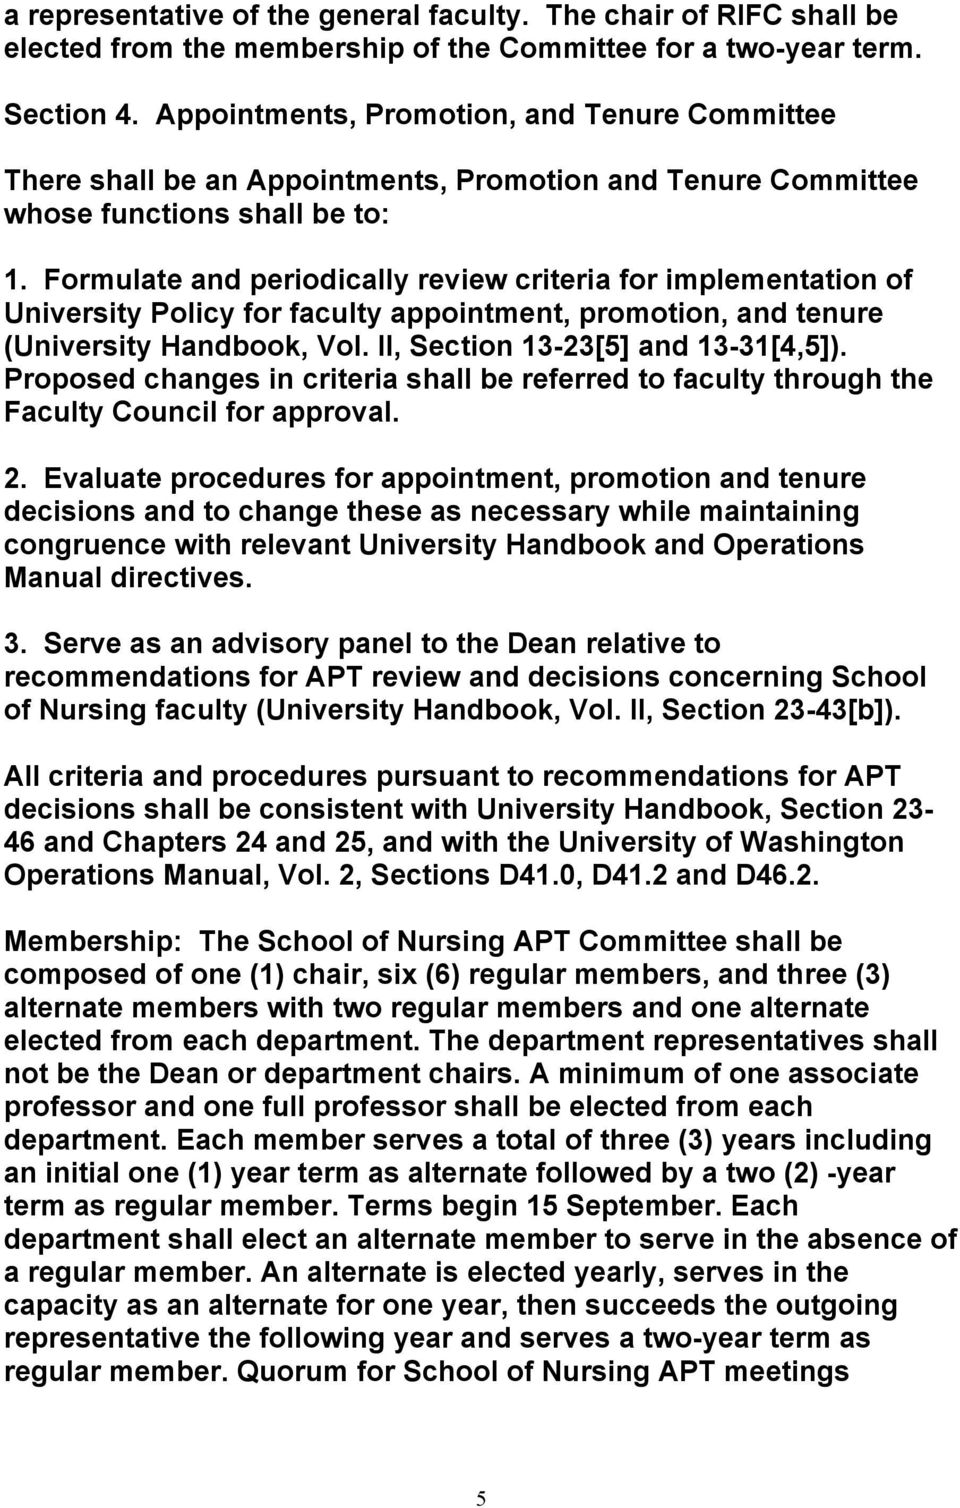 Formulate and periodically review criteria for implementation of University Policy for faculty appointment, promotion, and tenure (University Handbook, Vol. II, Section 13-23[5] and 13-31[4,5]).